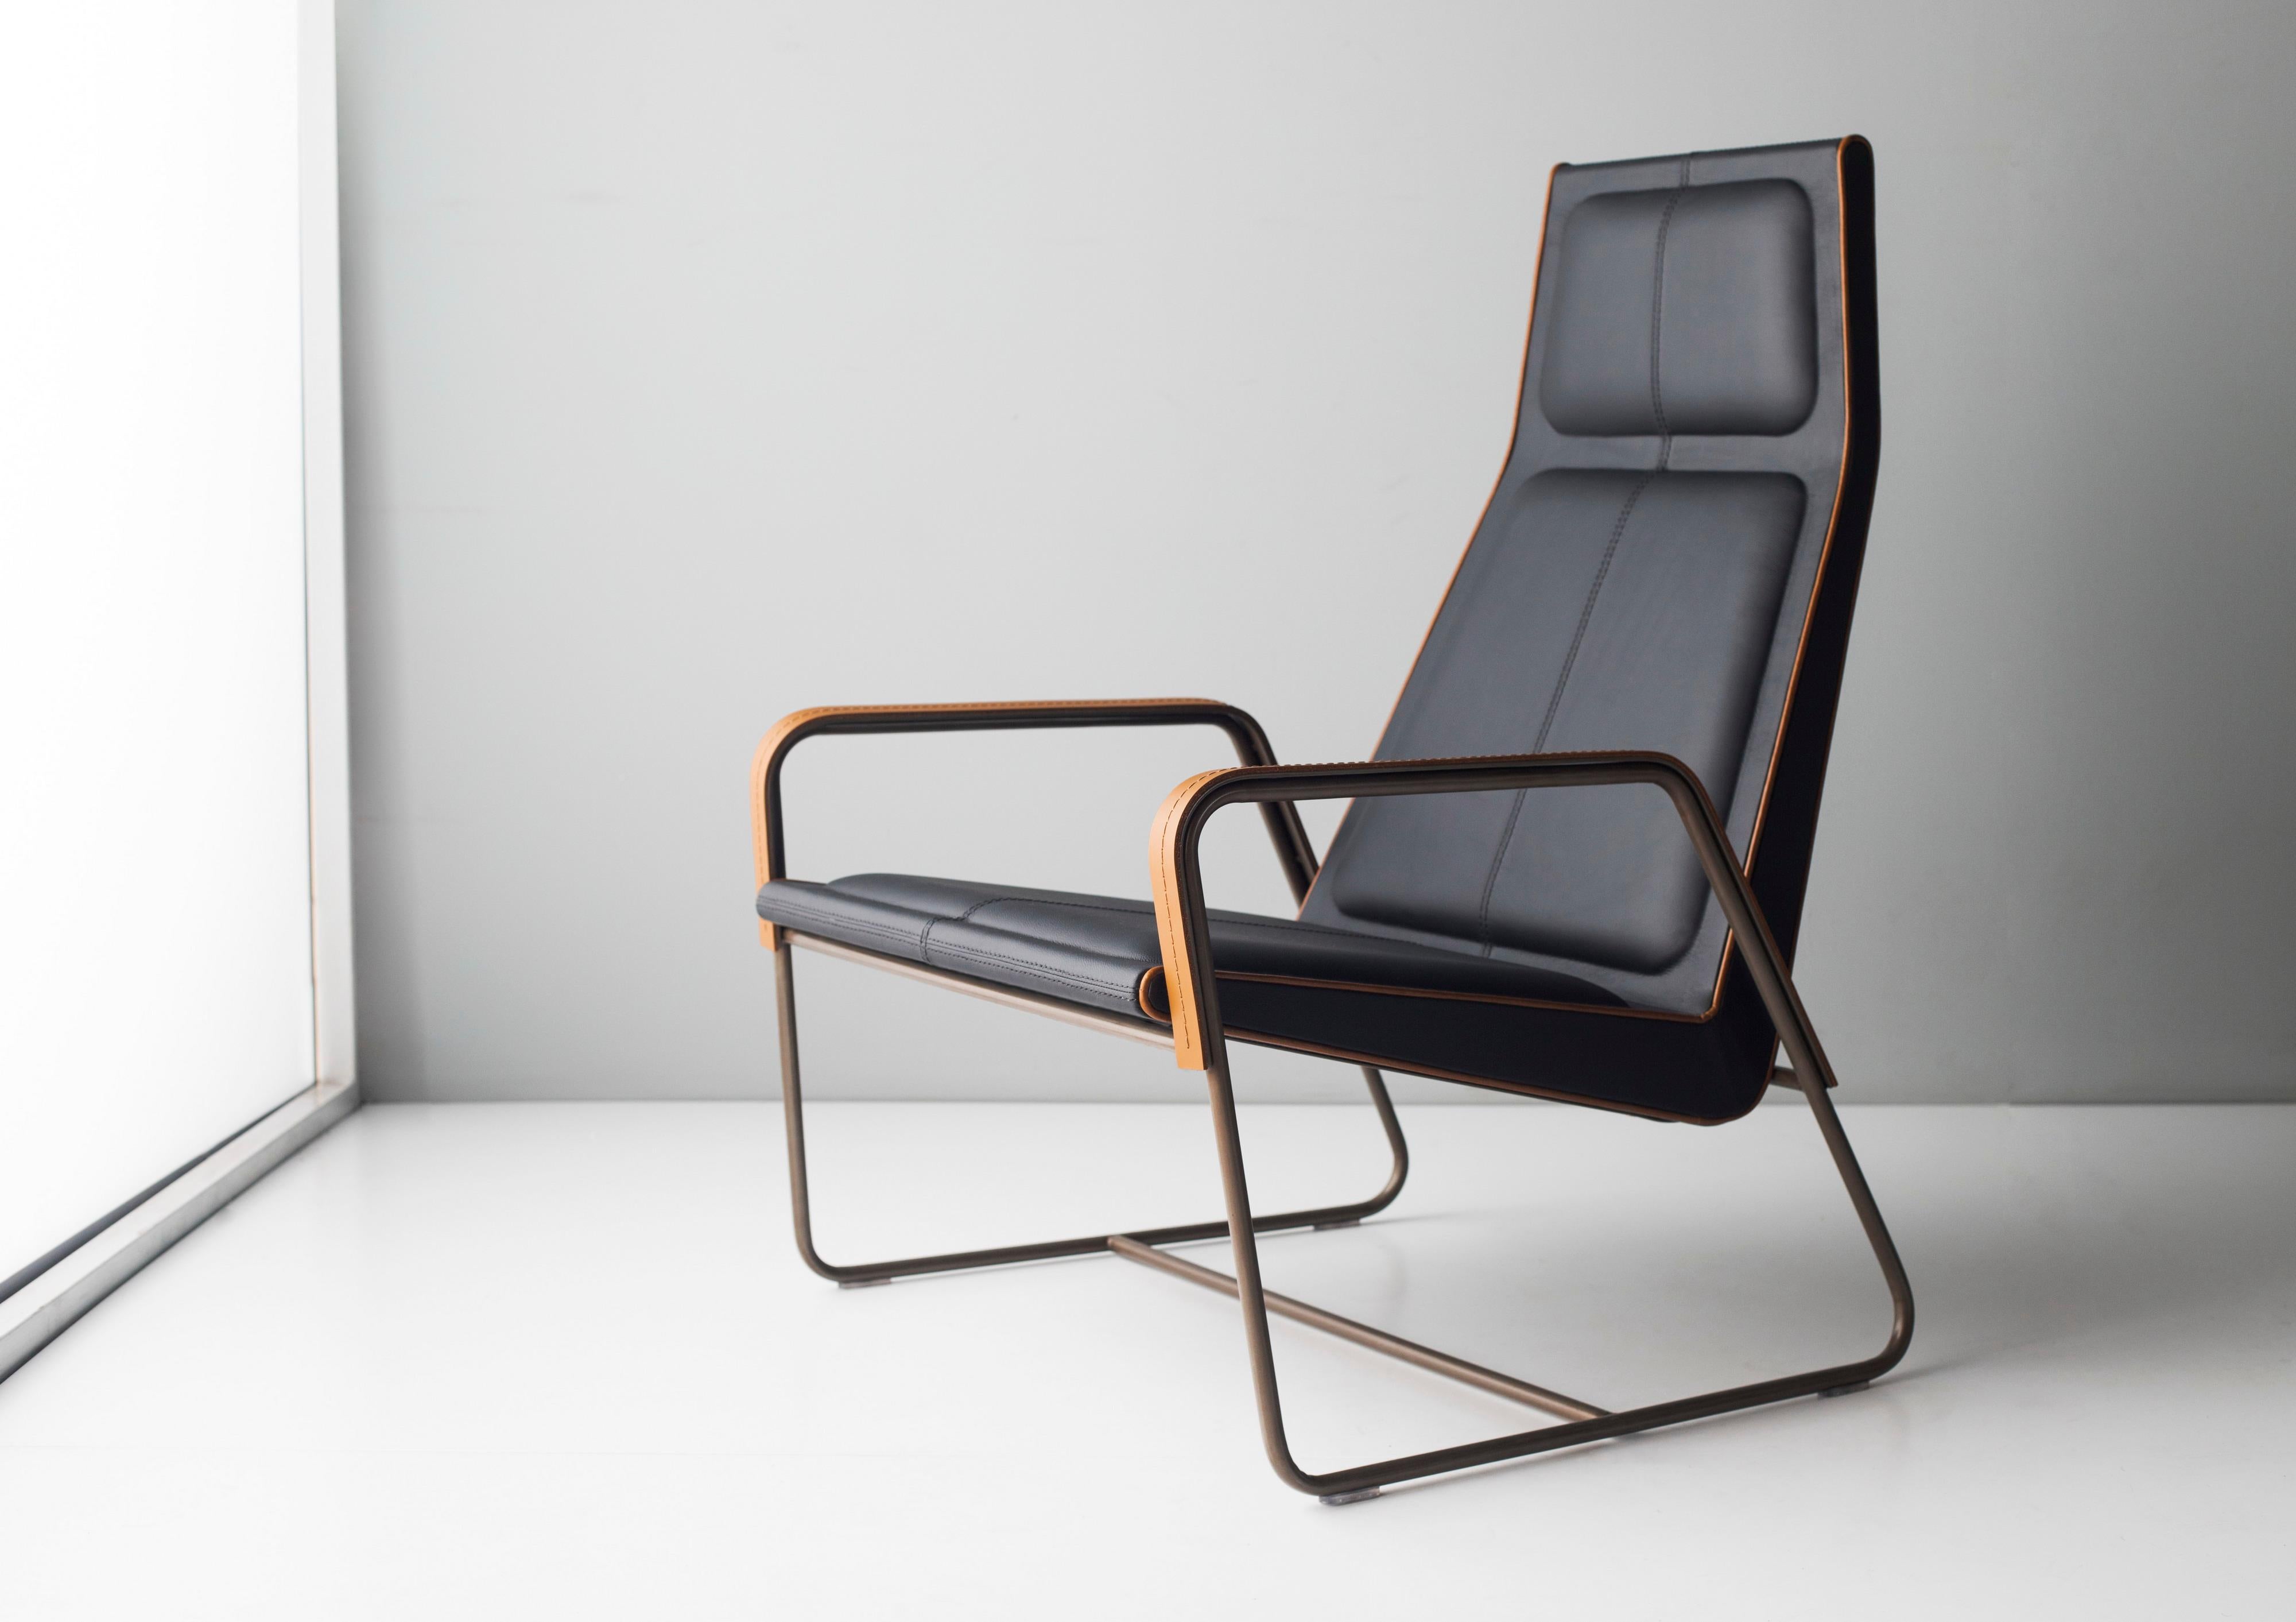 Vogue Lounge Chair by Doimo Brasil
Dimensions: W 76 x D 82 x H 98 cm 
Materials: Paint, Leather.


With the intention of providing good taste and personality, Doimo deciphers trends and follows the evolution of man and his space. To this end, it